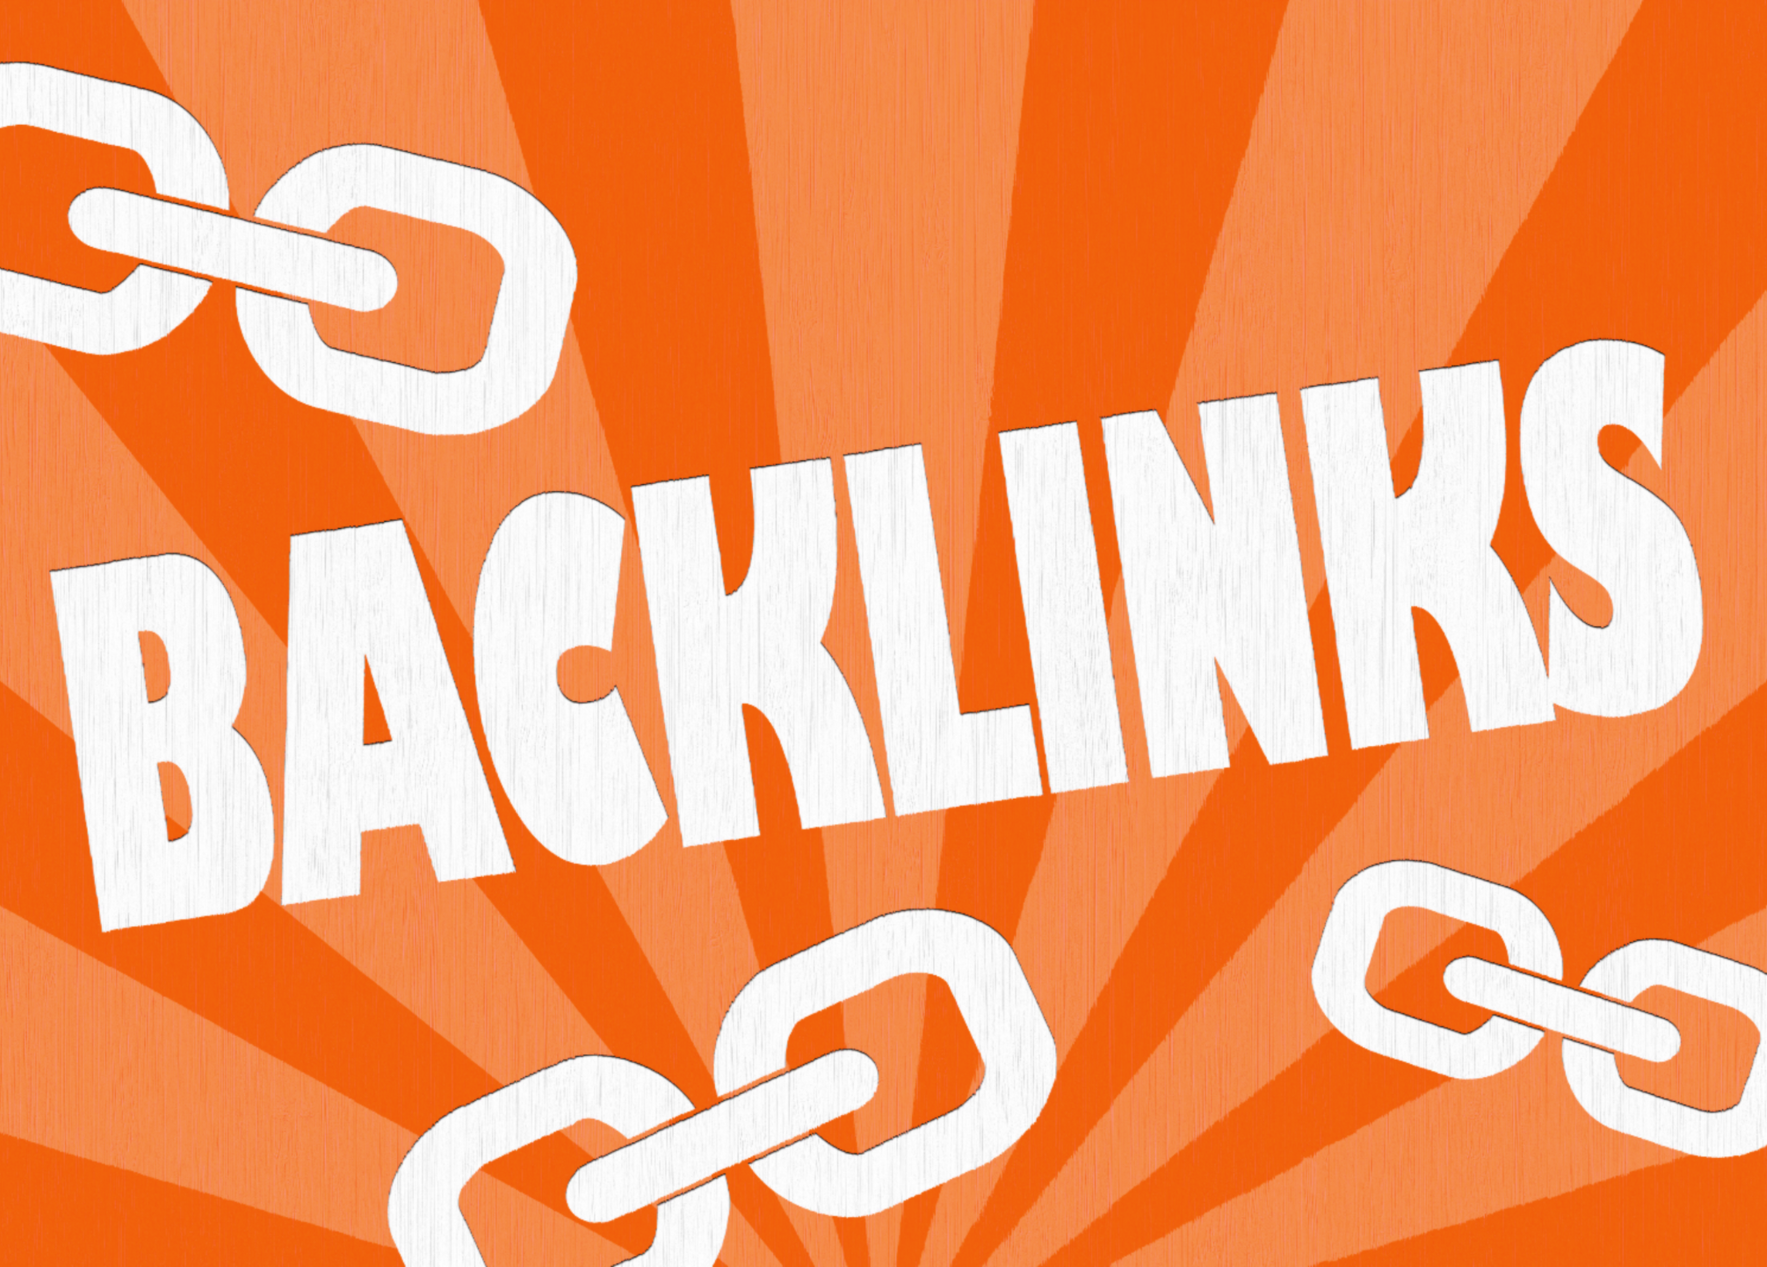 How to Build your backlinks